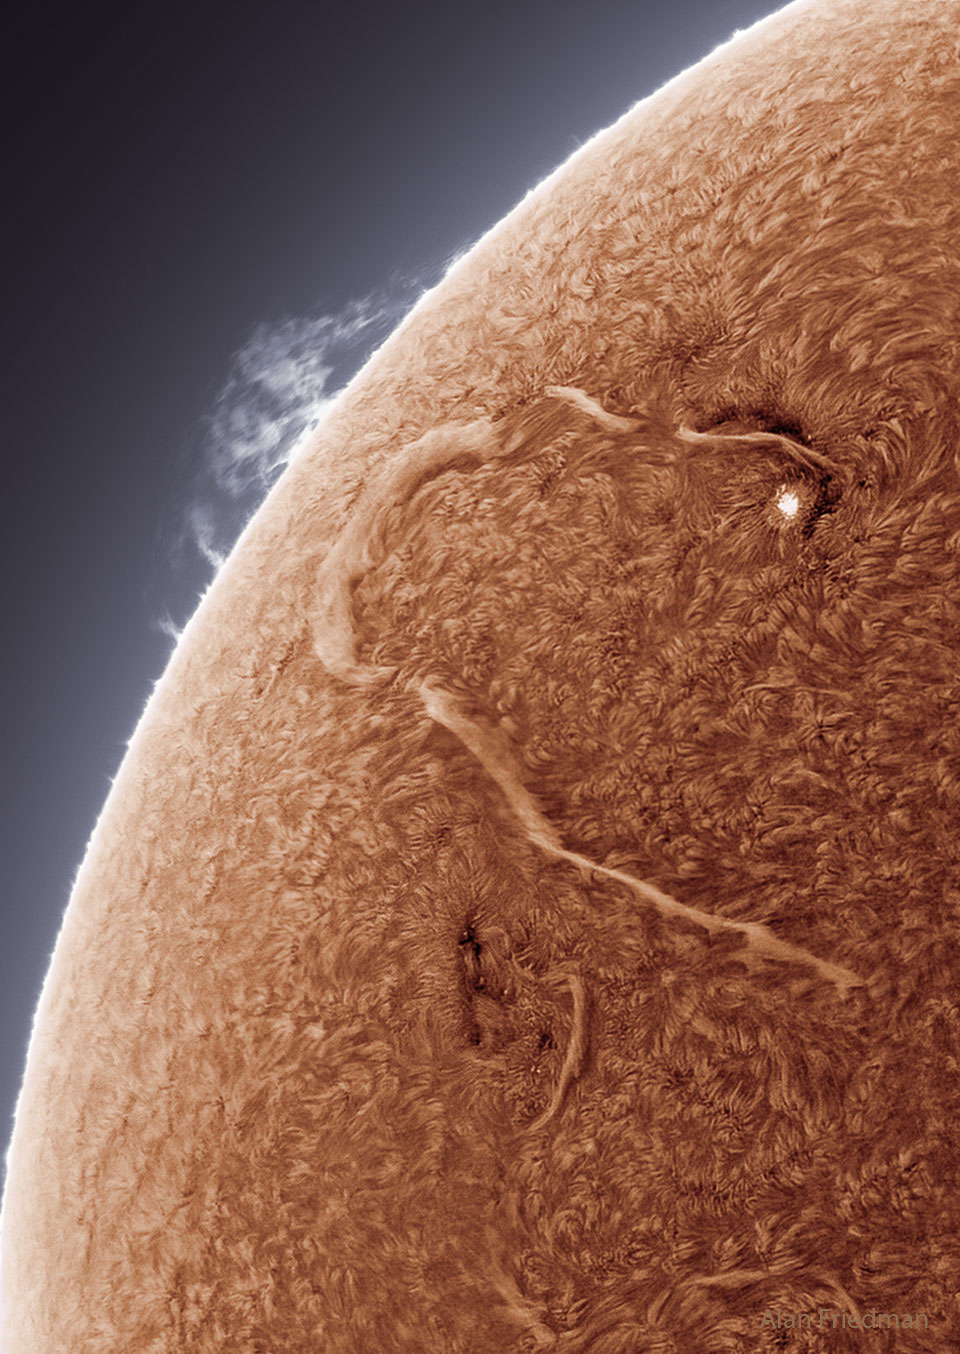 The featured image shows a long filament snaking across the
face of the Sun. 
Please see the explanation for more detailed information.